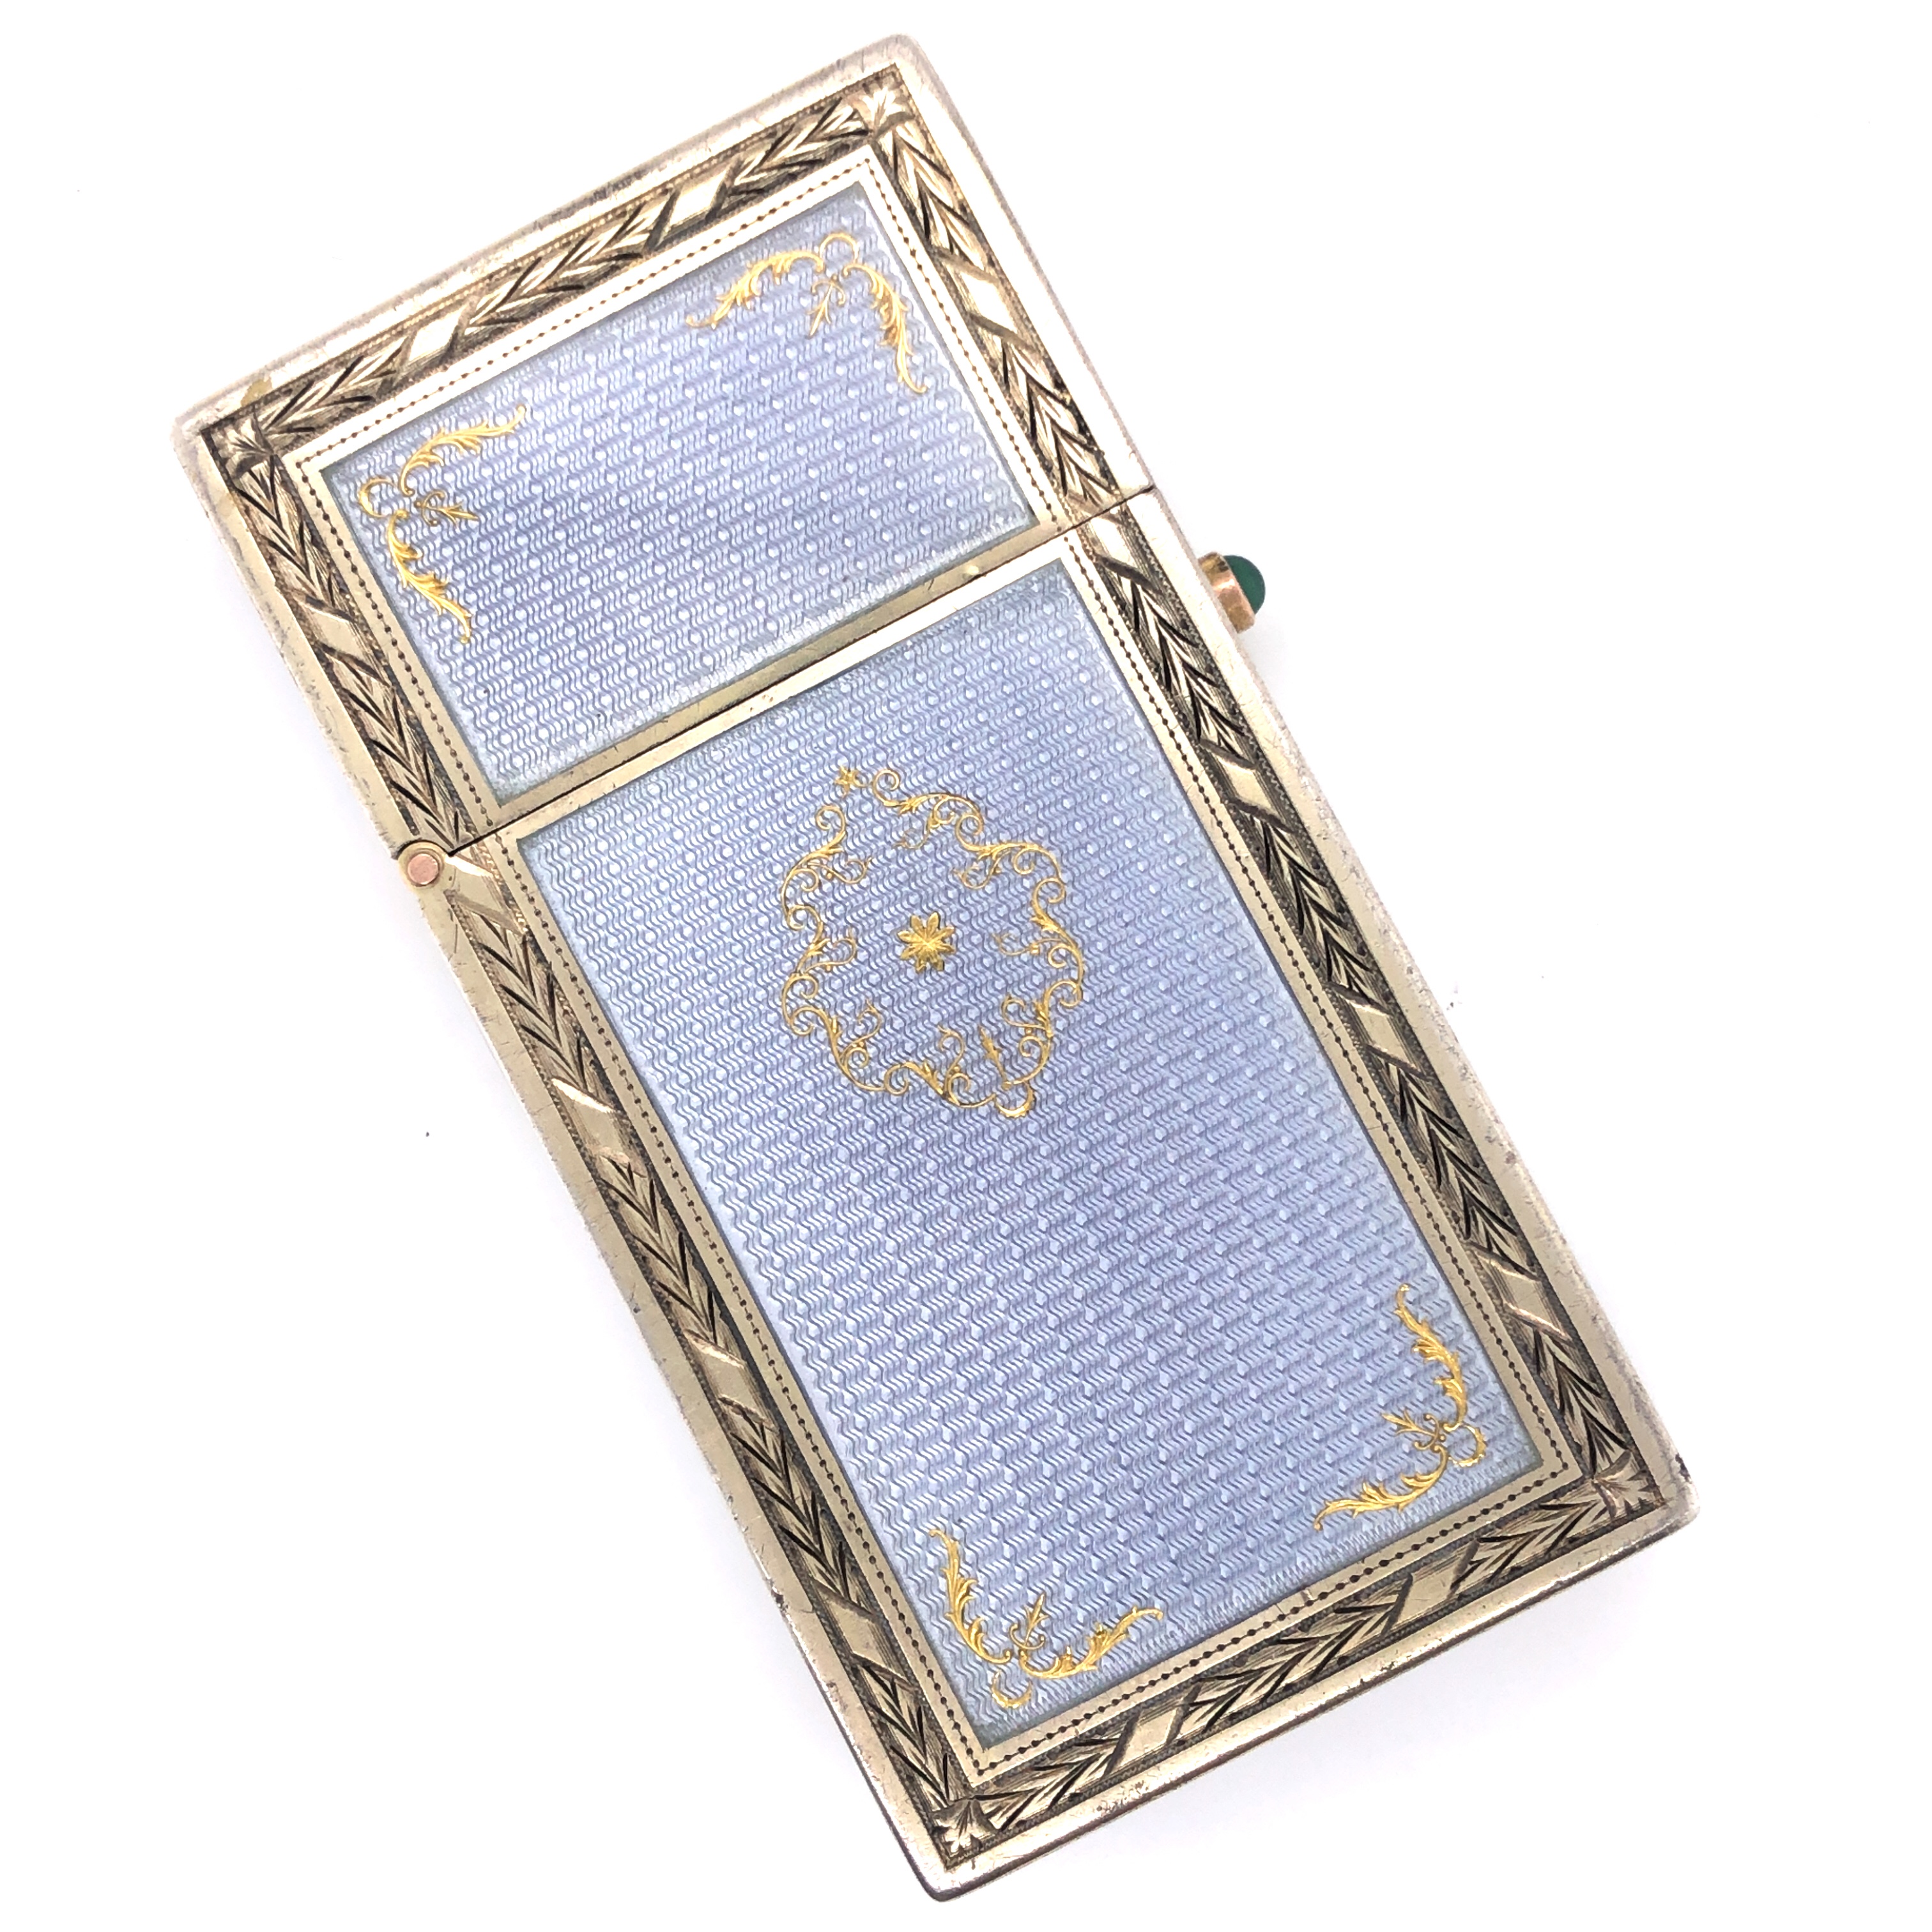 Silver and Enamel Card Case - Image 2 of 5